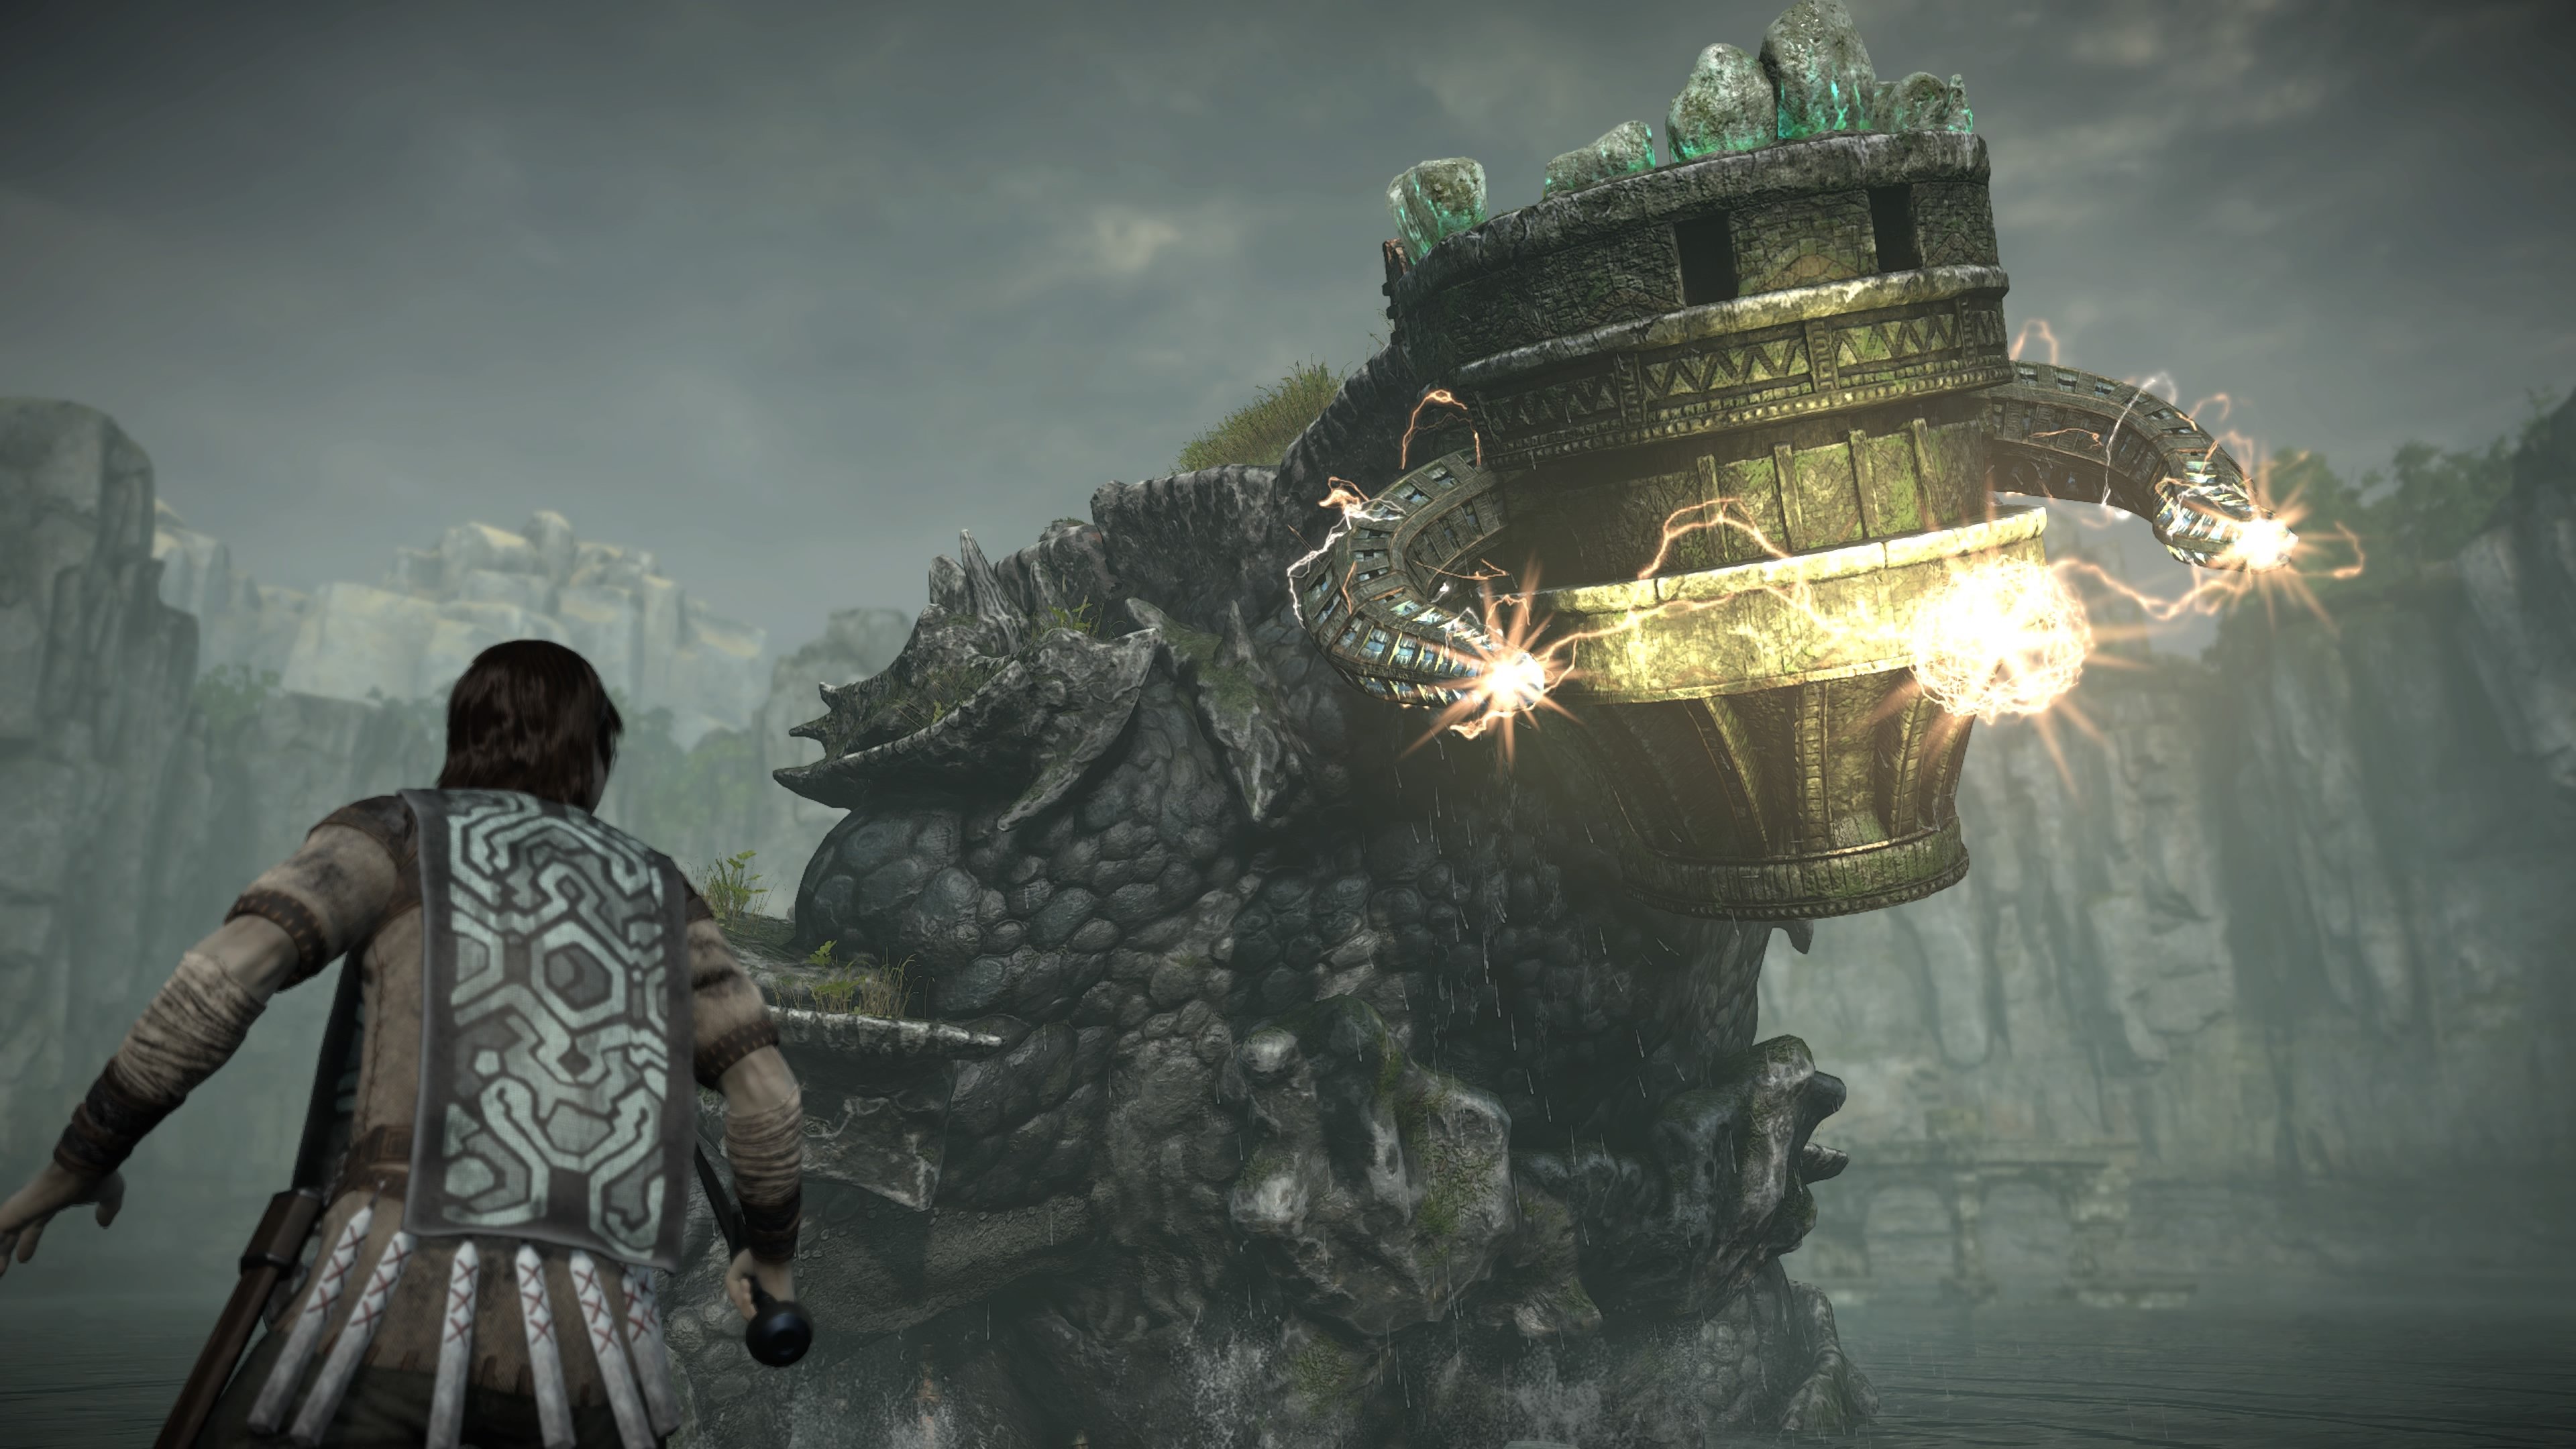 PS5) Shadow of the Colossus is just a MASTERPIECE.